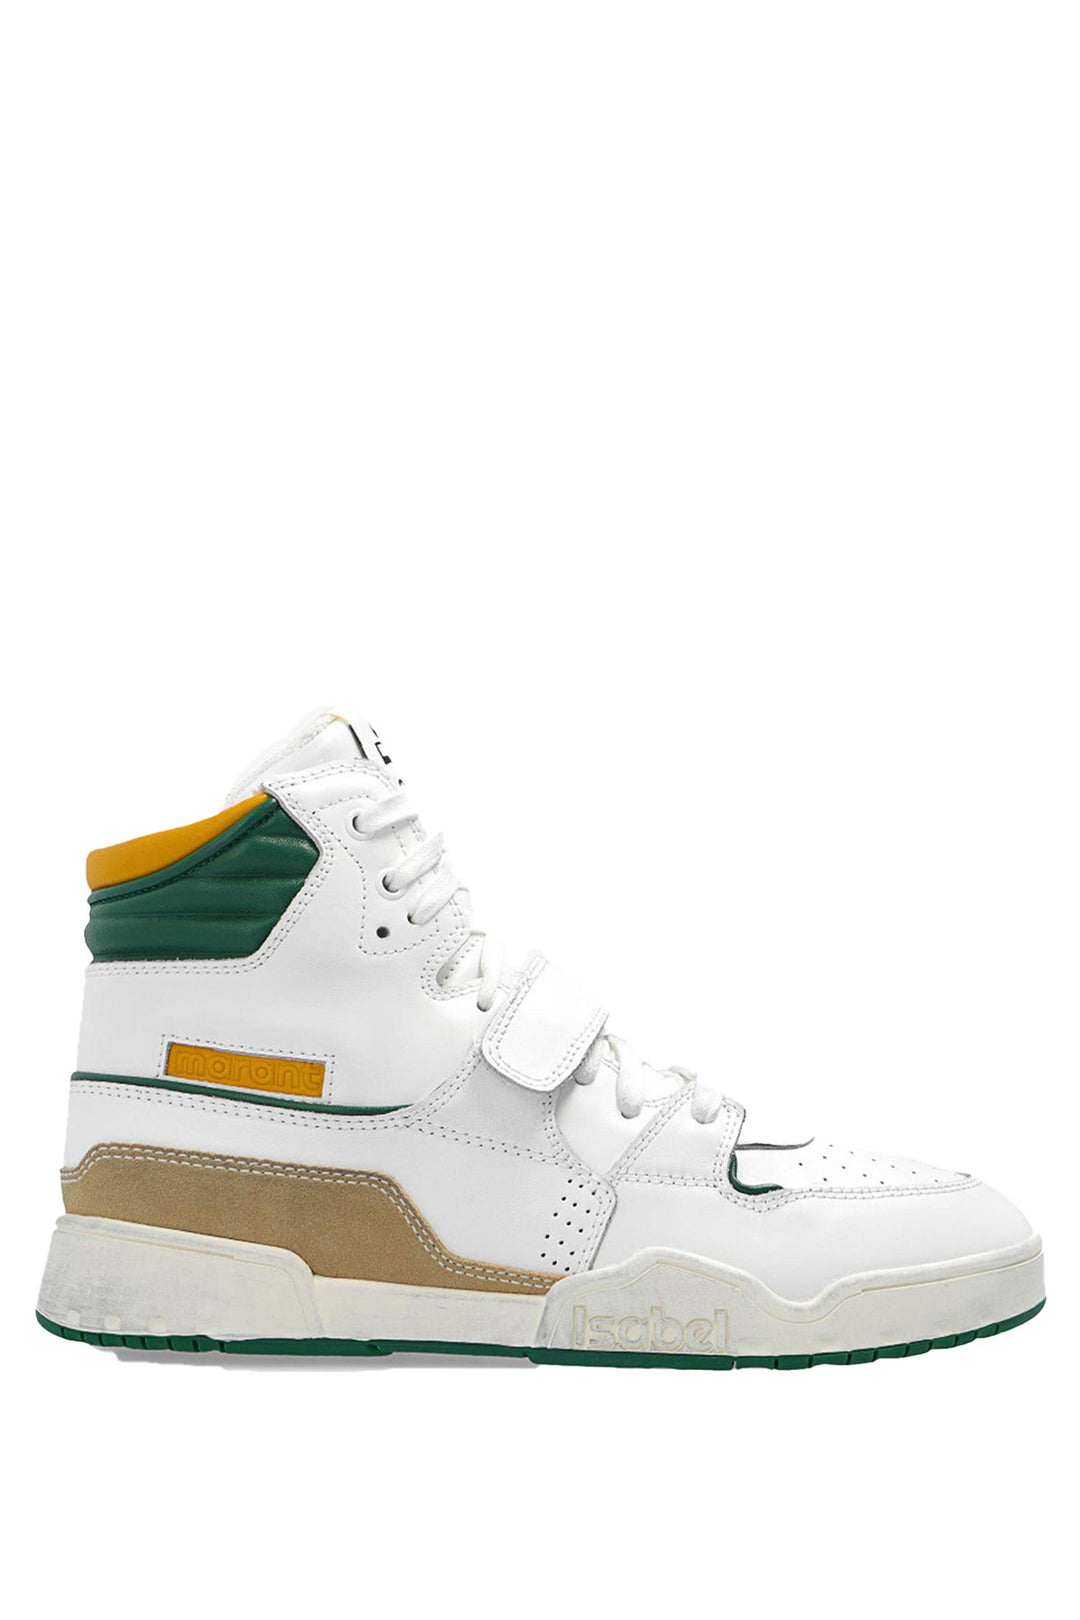 Alsee Sneakers Yellow/Green